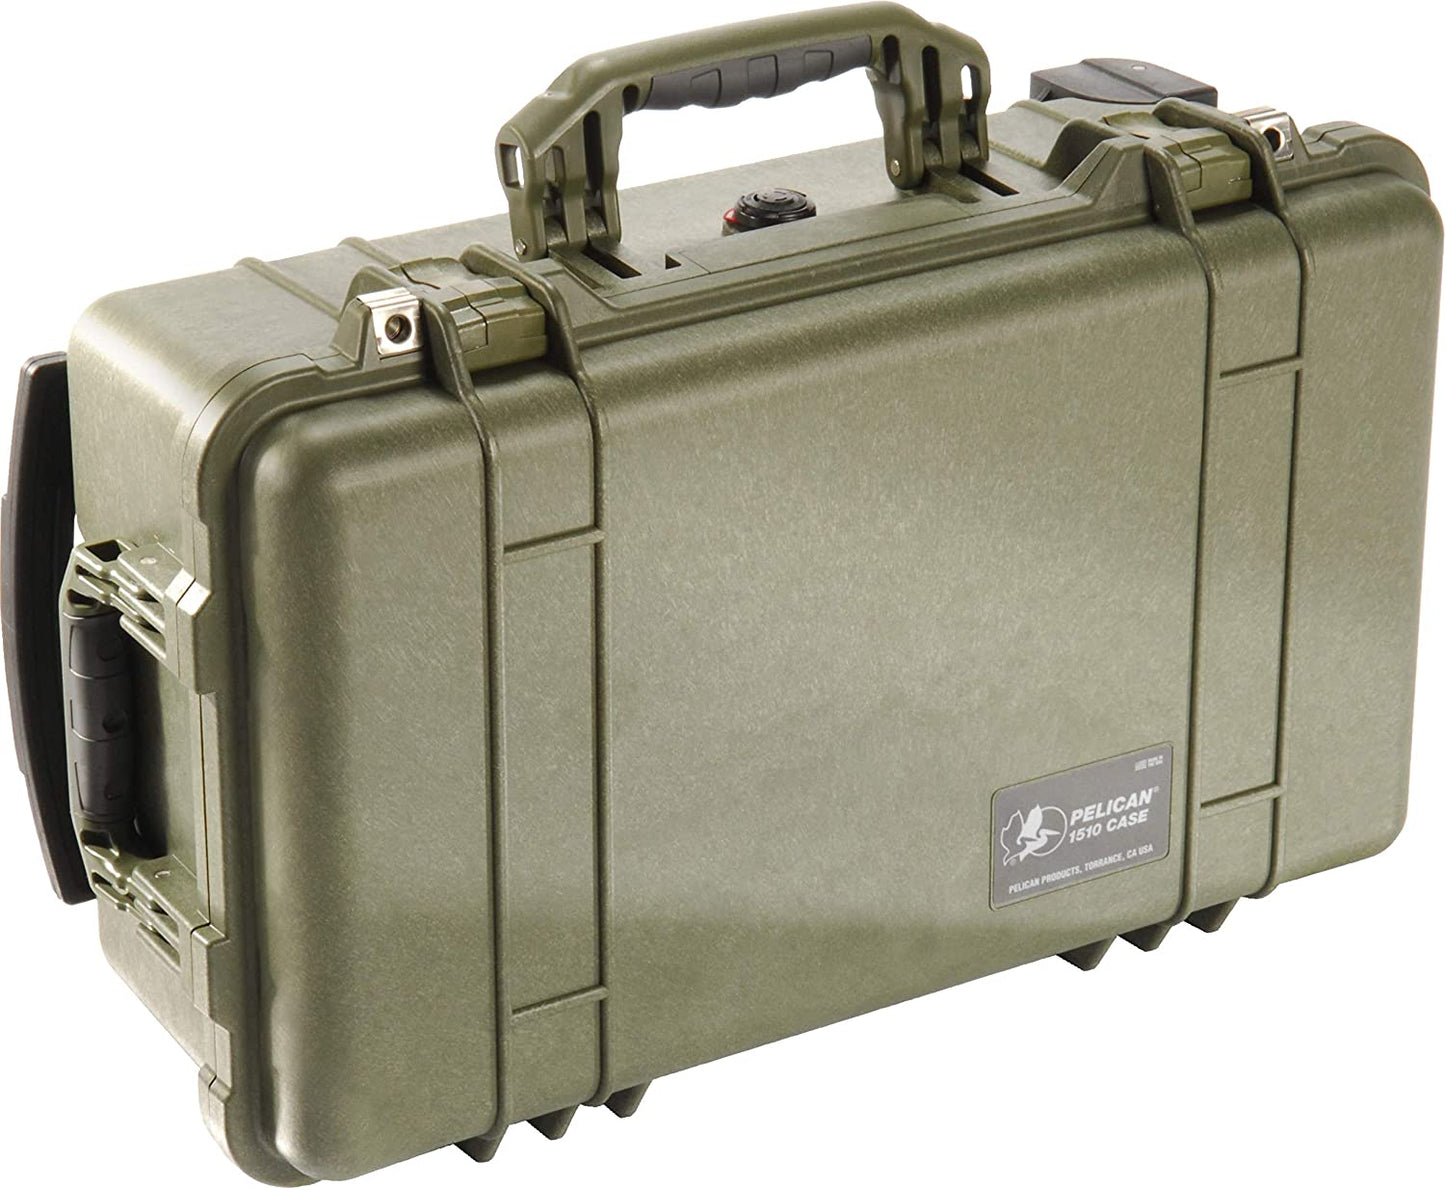 Pelican Flightline Waterproof Carry-on-Case with Yellow/Black Divider Set and Wheels (OLIVE DRAB GREEN) | Model - 1510